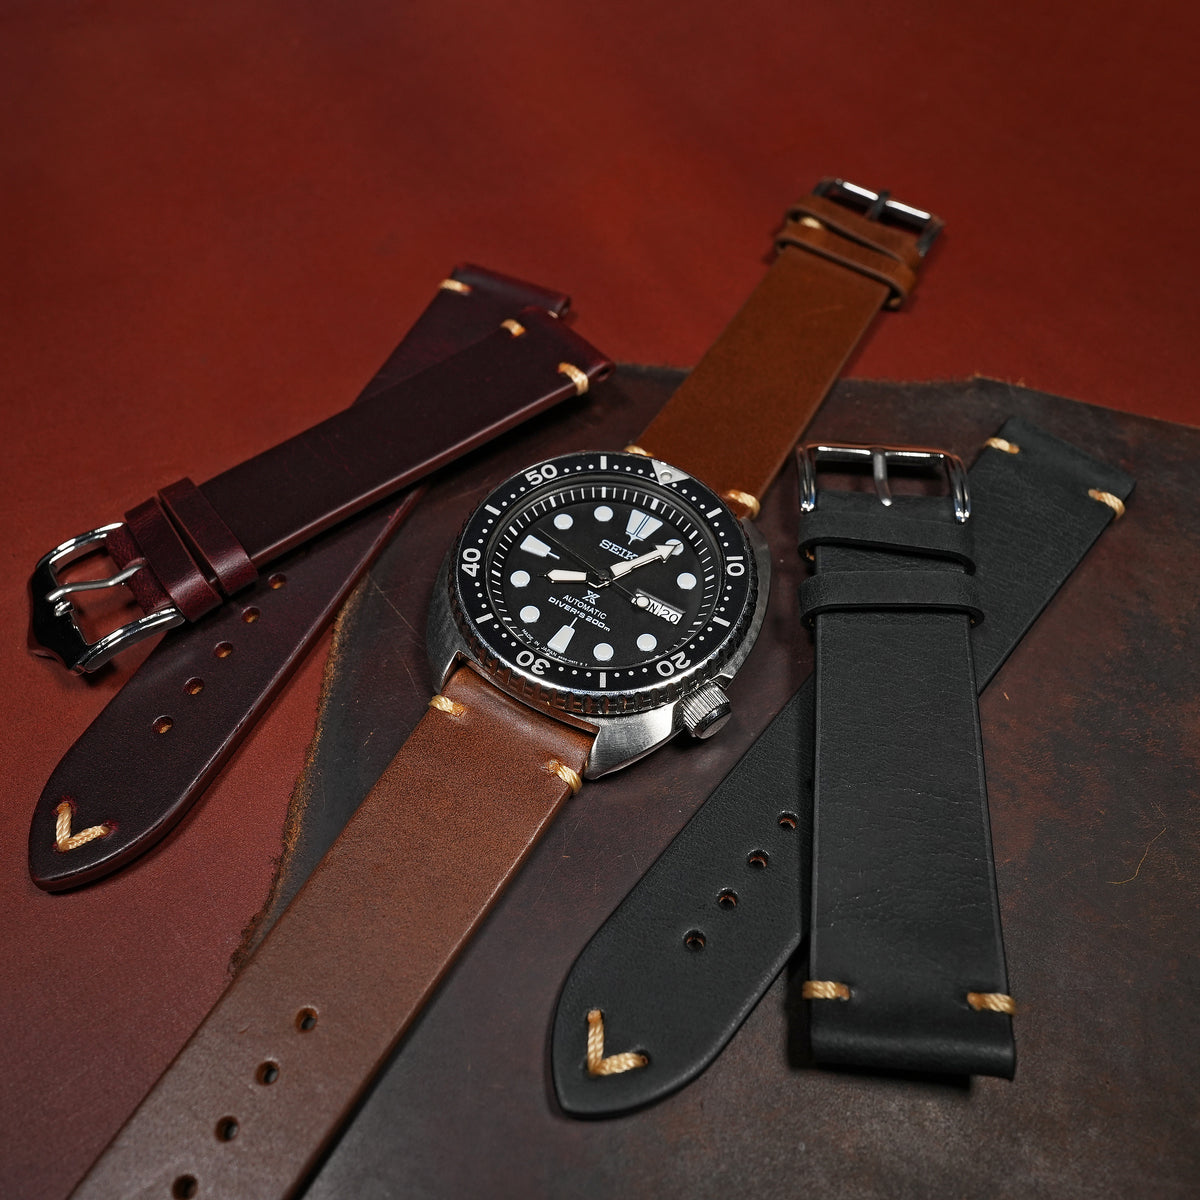 Premium Vintage Oil Waxed Leather Watch Strap in Tan